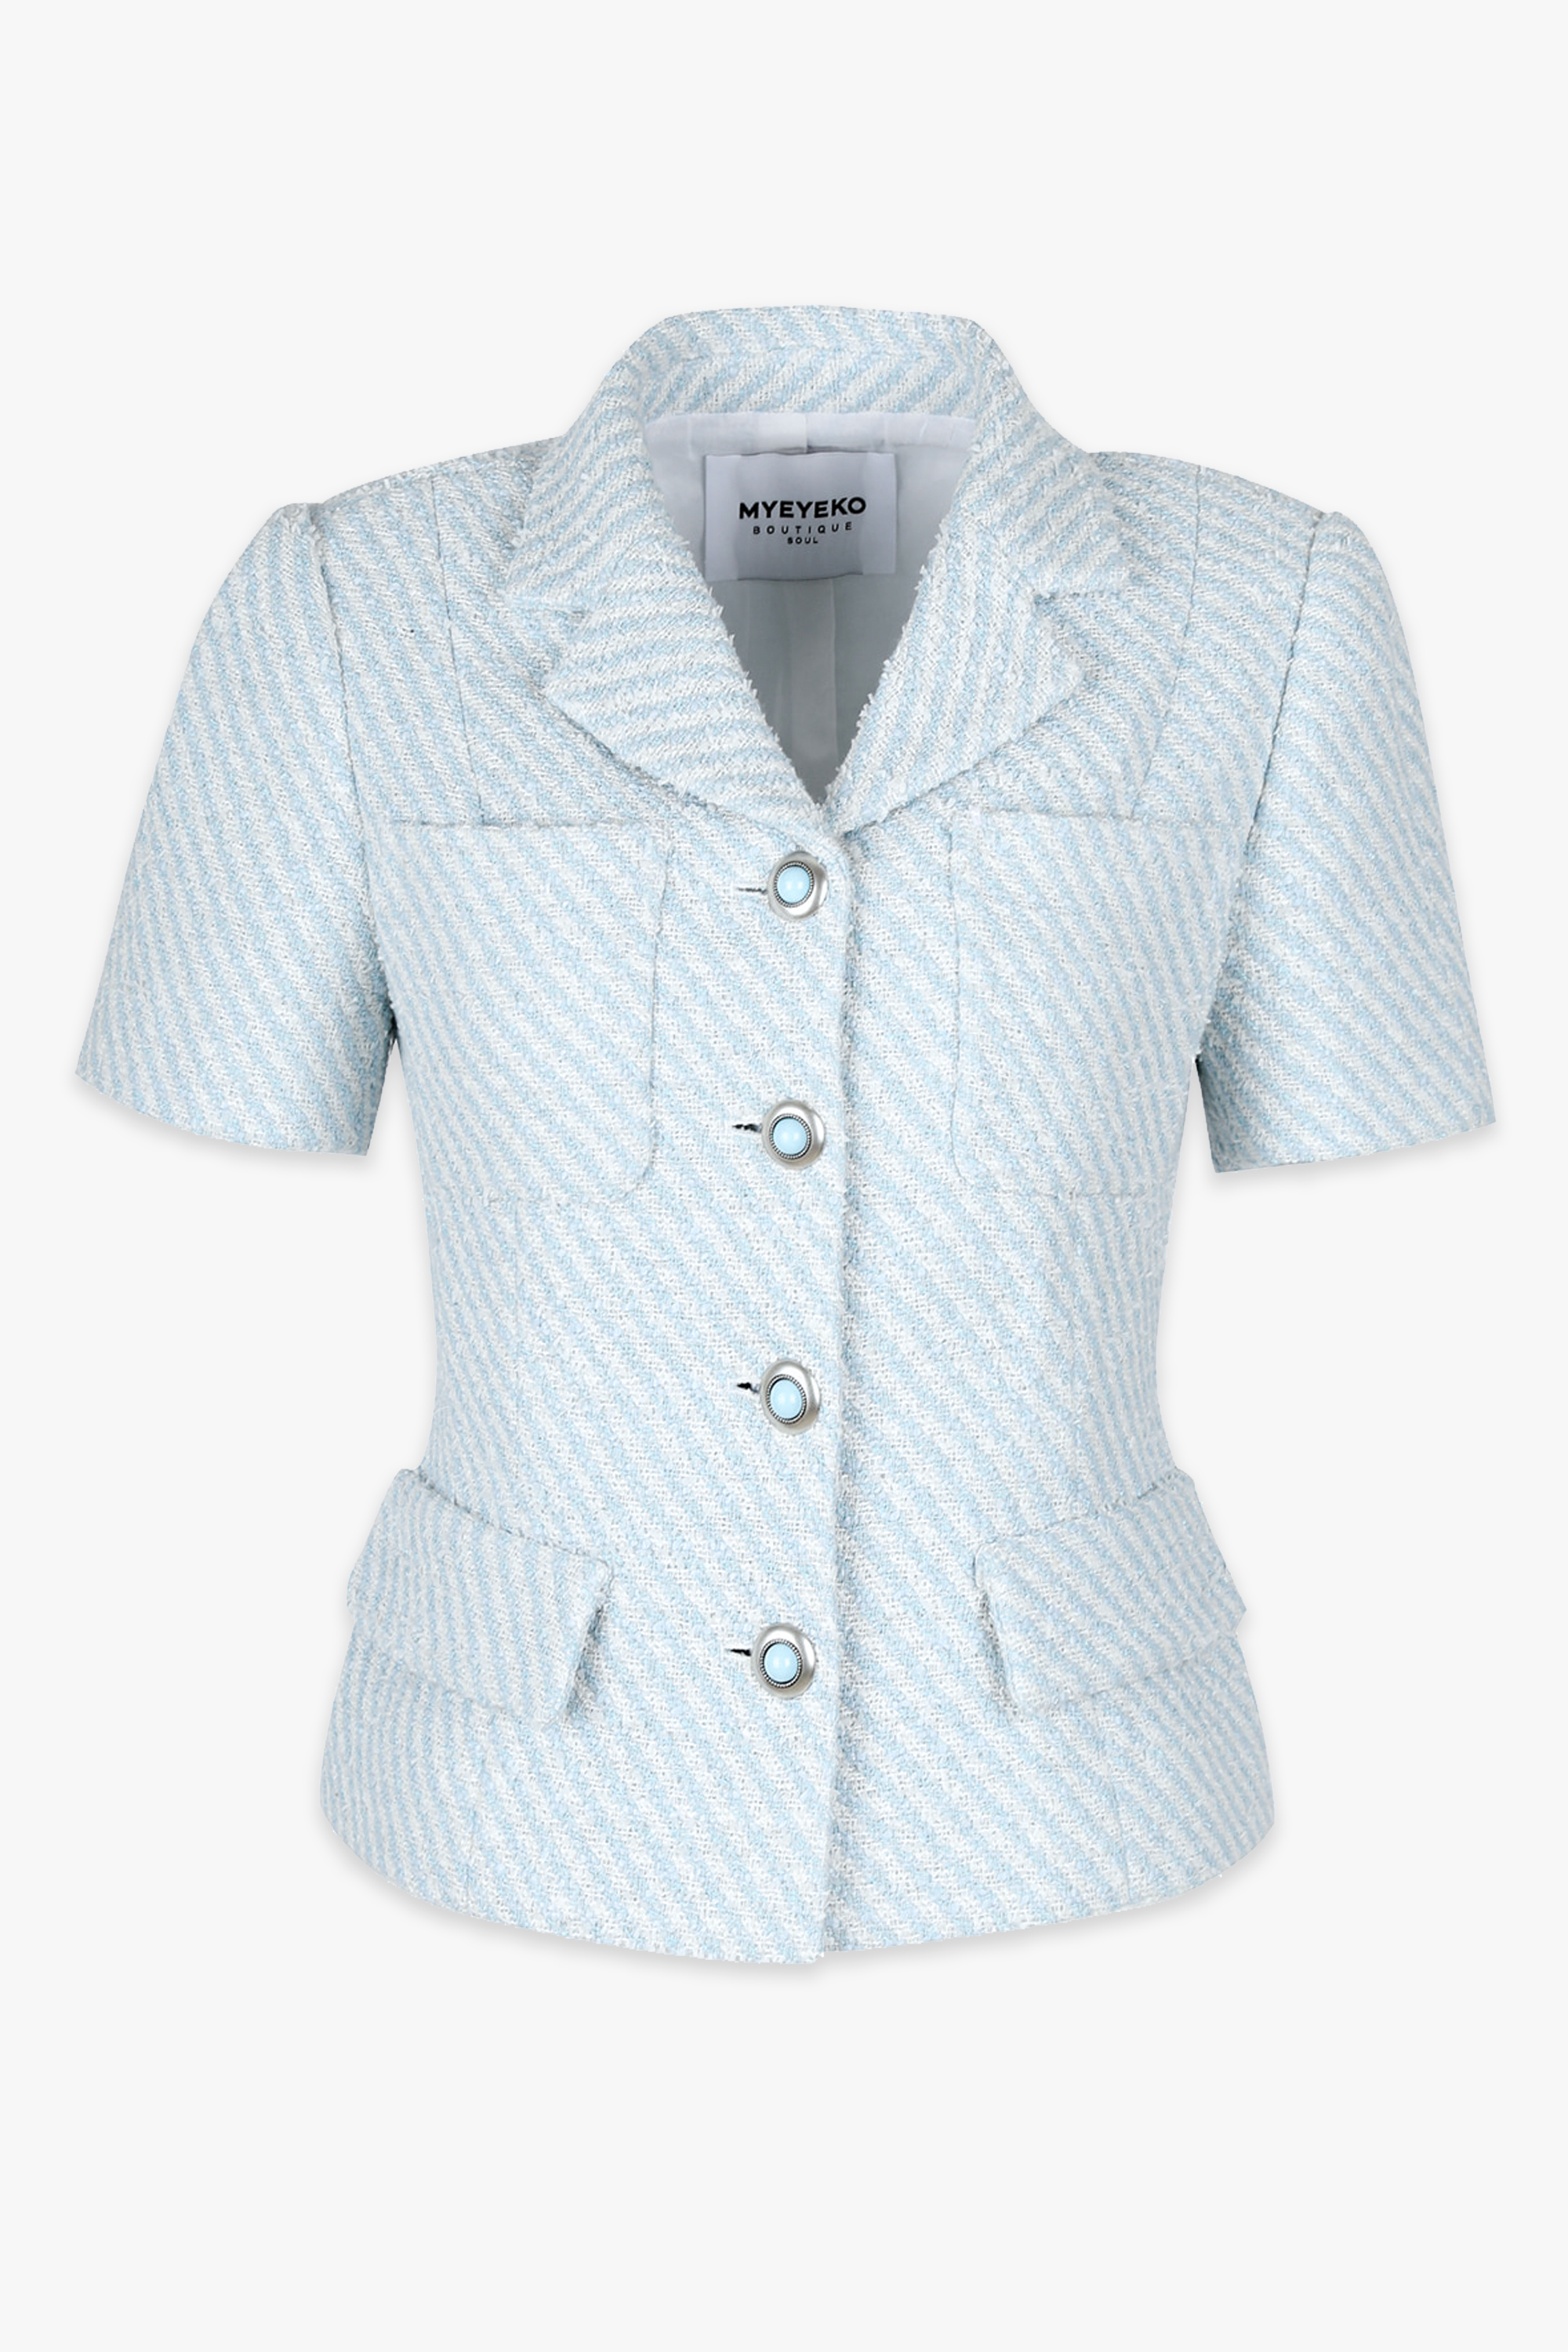 HIGH QUALITY LINE - STRIPED COTTON-BLEND TWEED JACKET